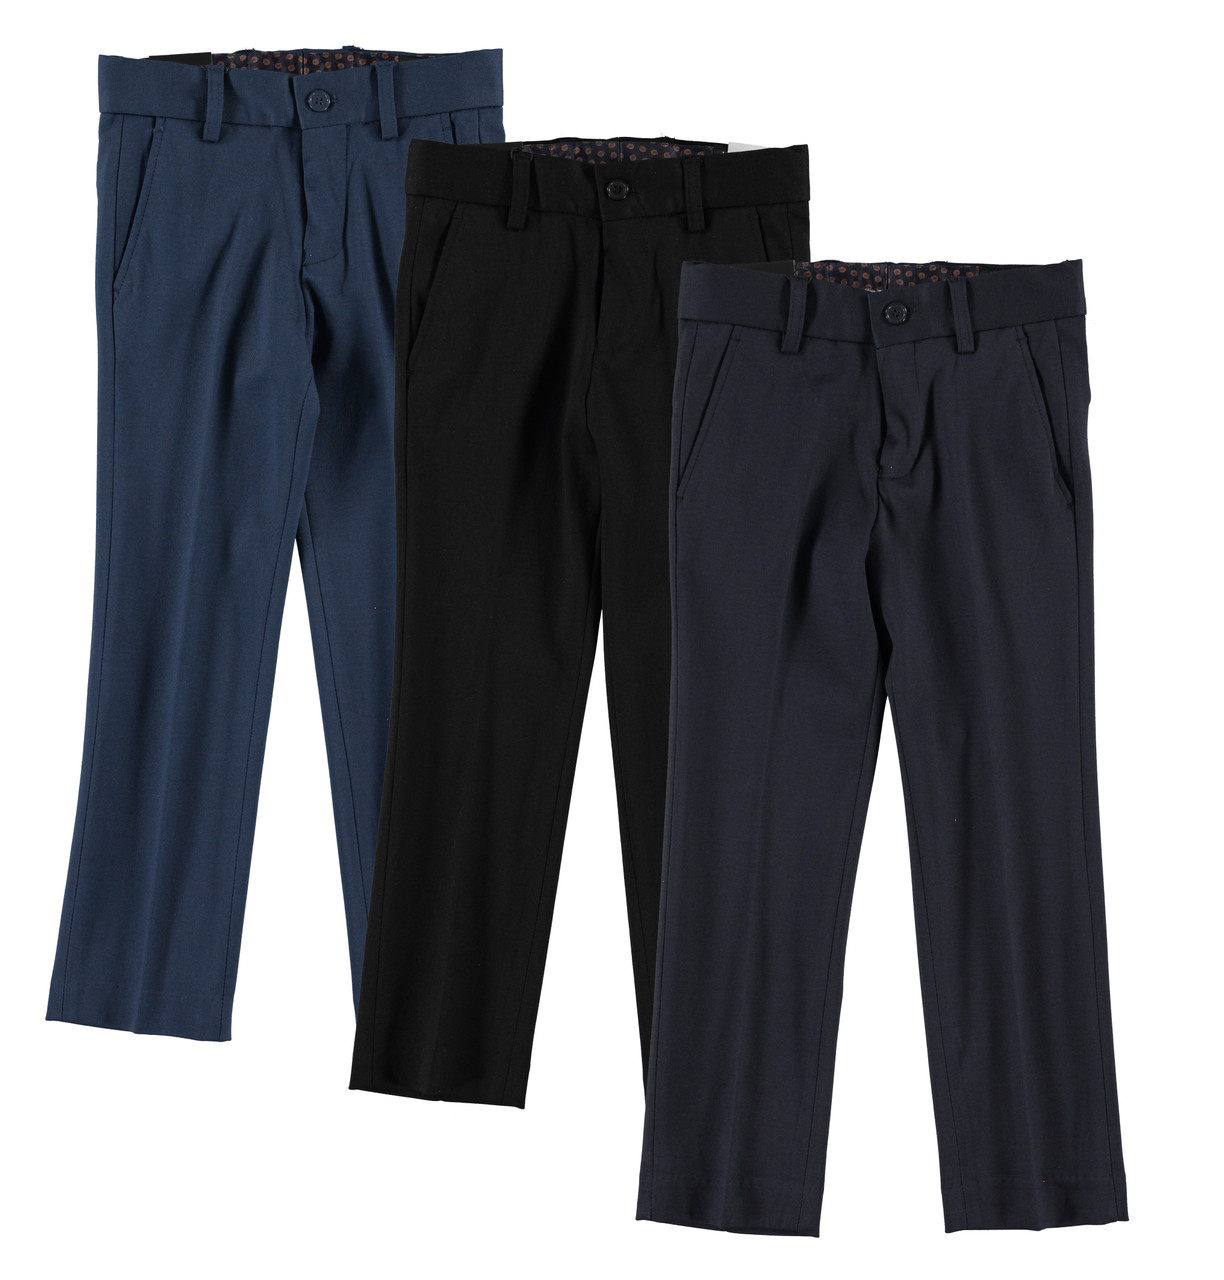 Boys Slim Fit Stretch Pants - Double Header USA